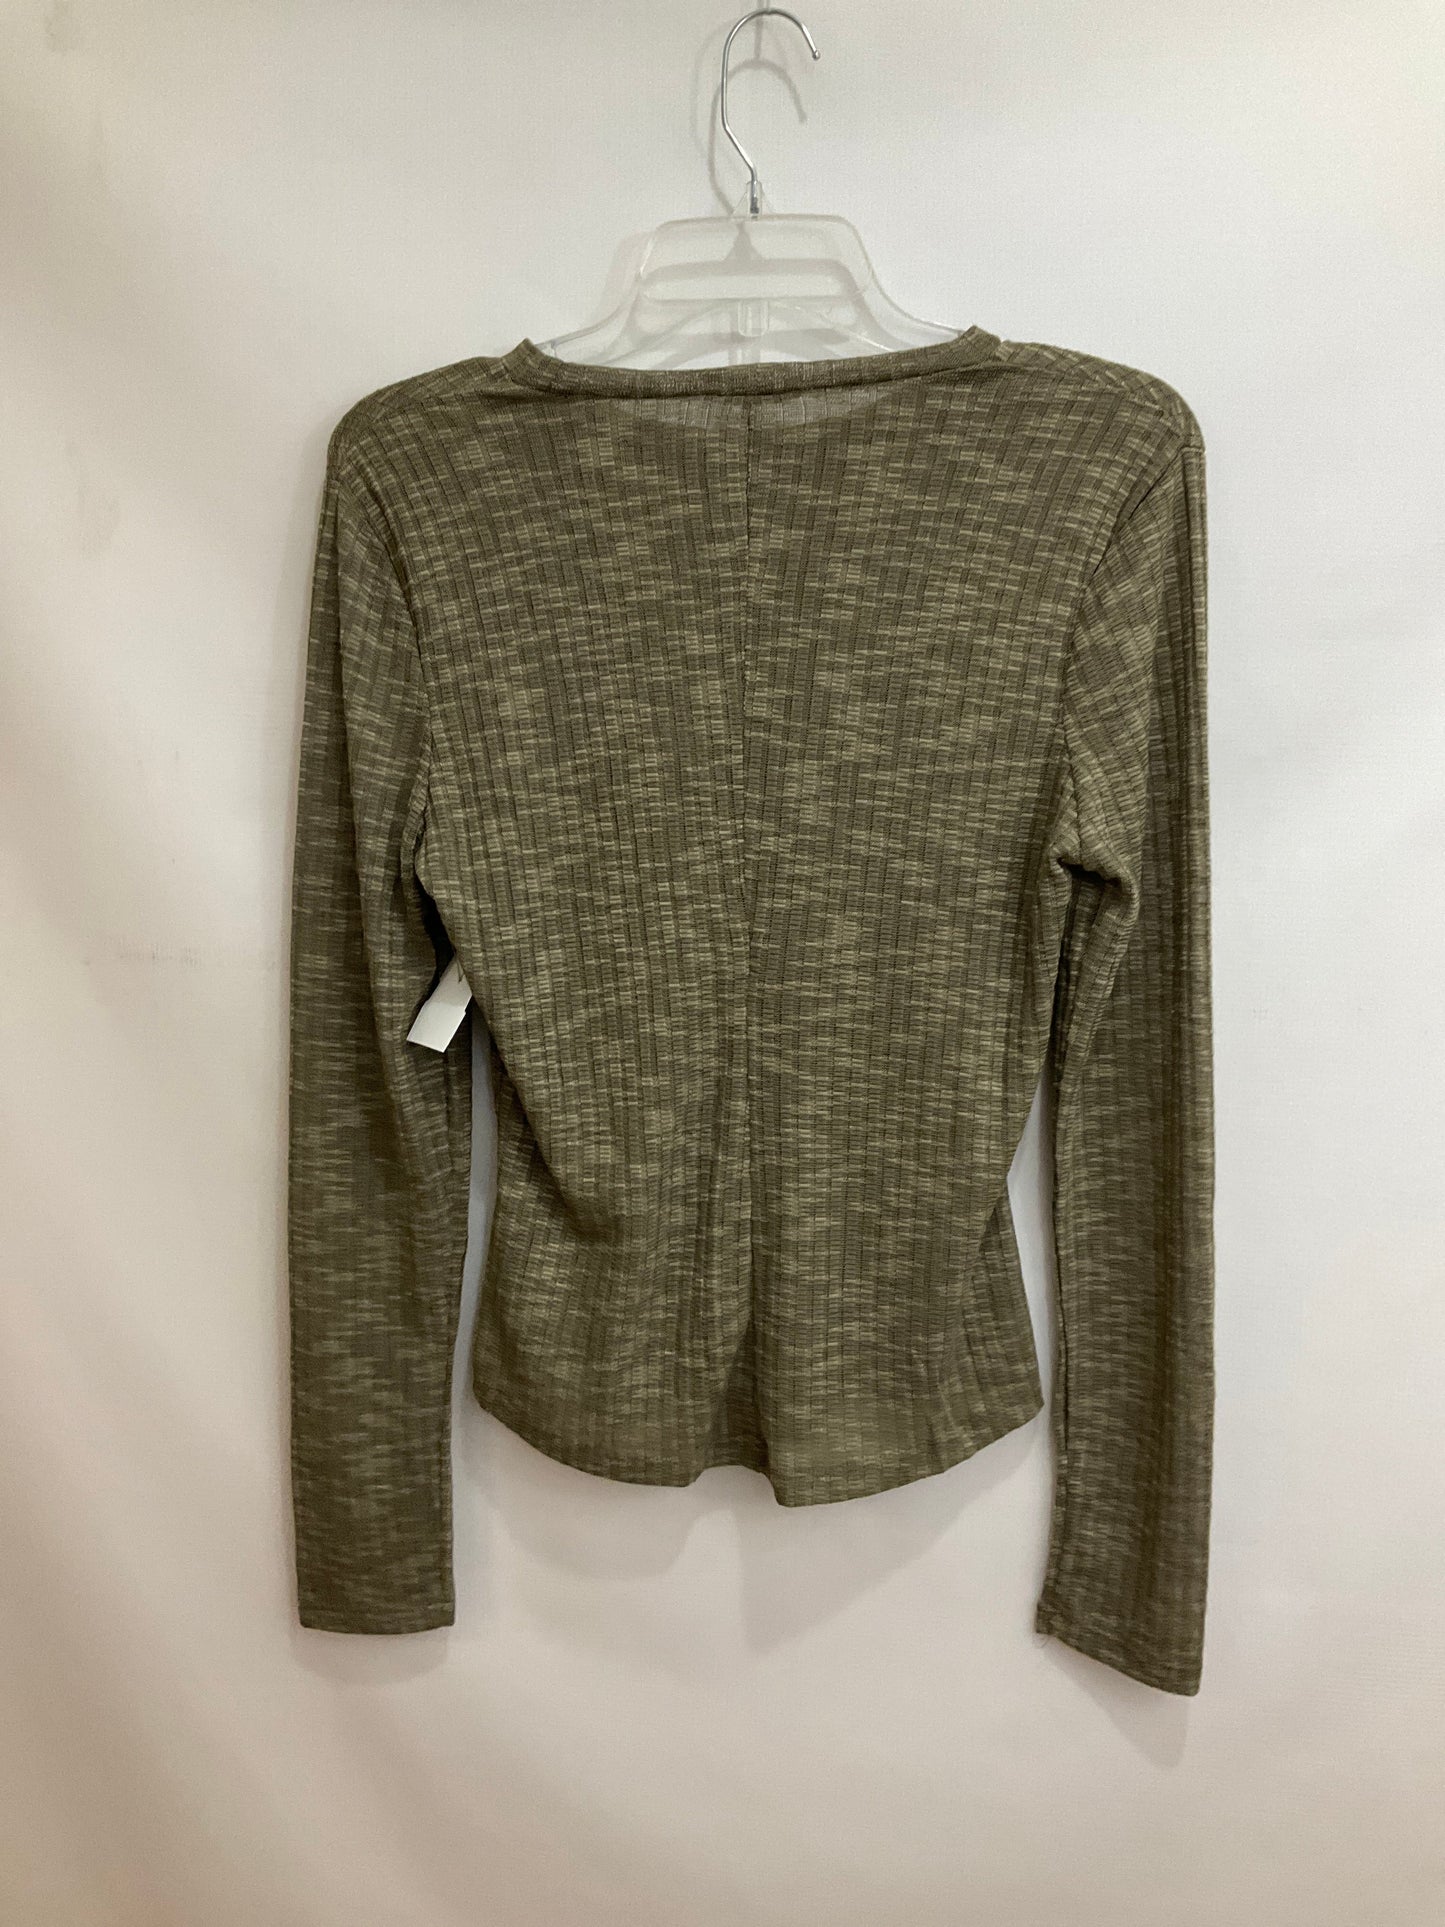 Green Top Long Sleeve Basic Free People, Size M